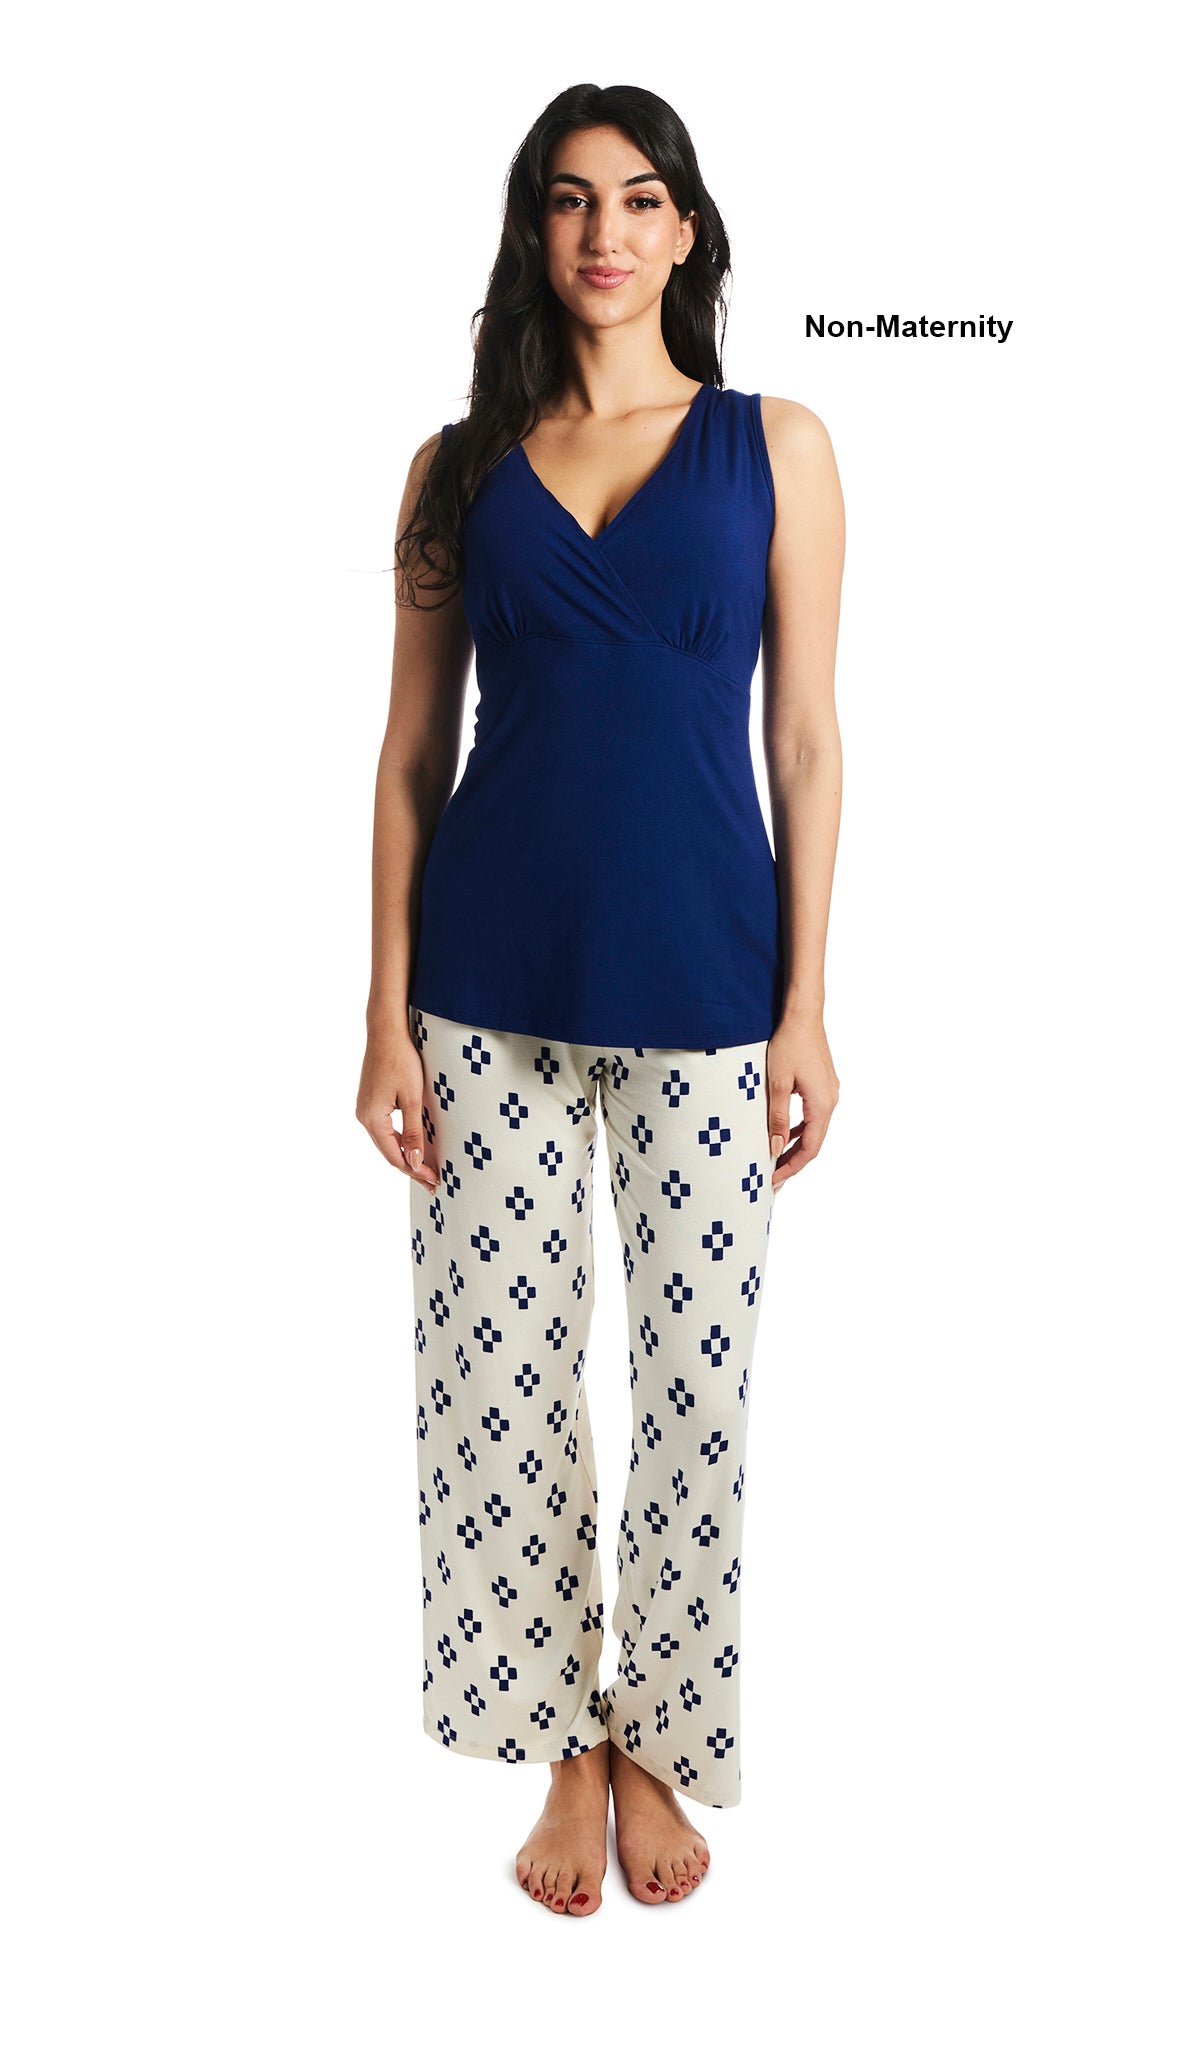 Geo Analise 3-Piece Set, pregnant woman wearing criss-cross bust tank top and pant as non-maternity.